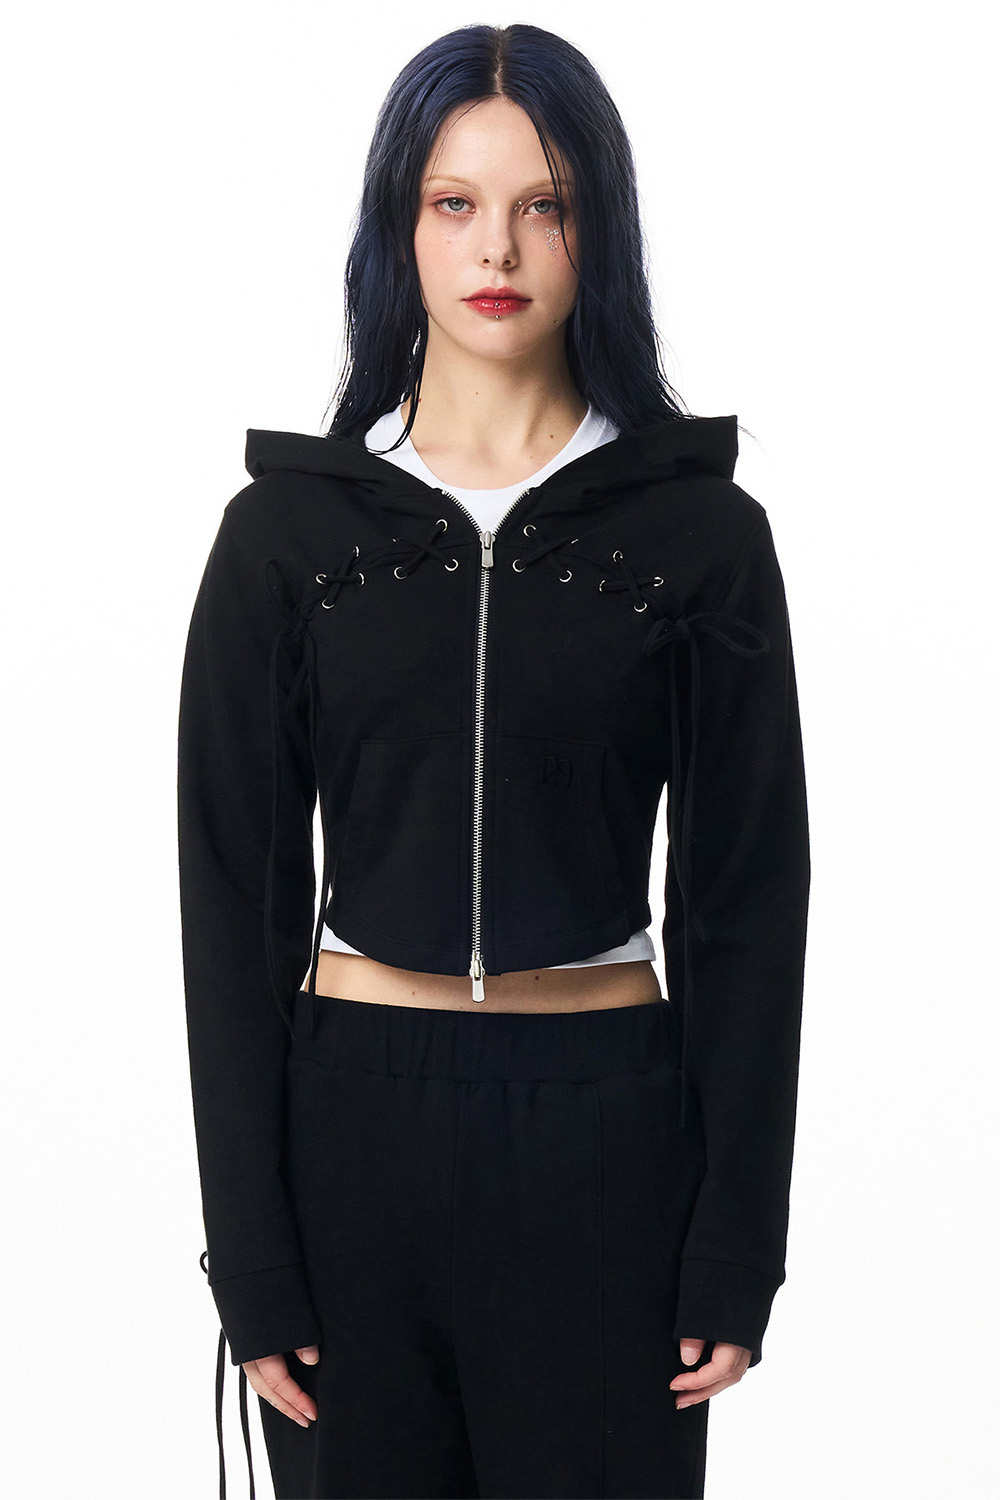 Eyelet Lace-Up Hooded Zip-Up Black